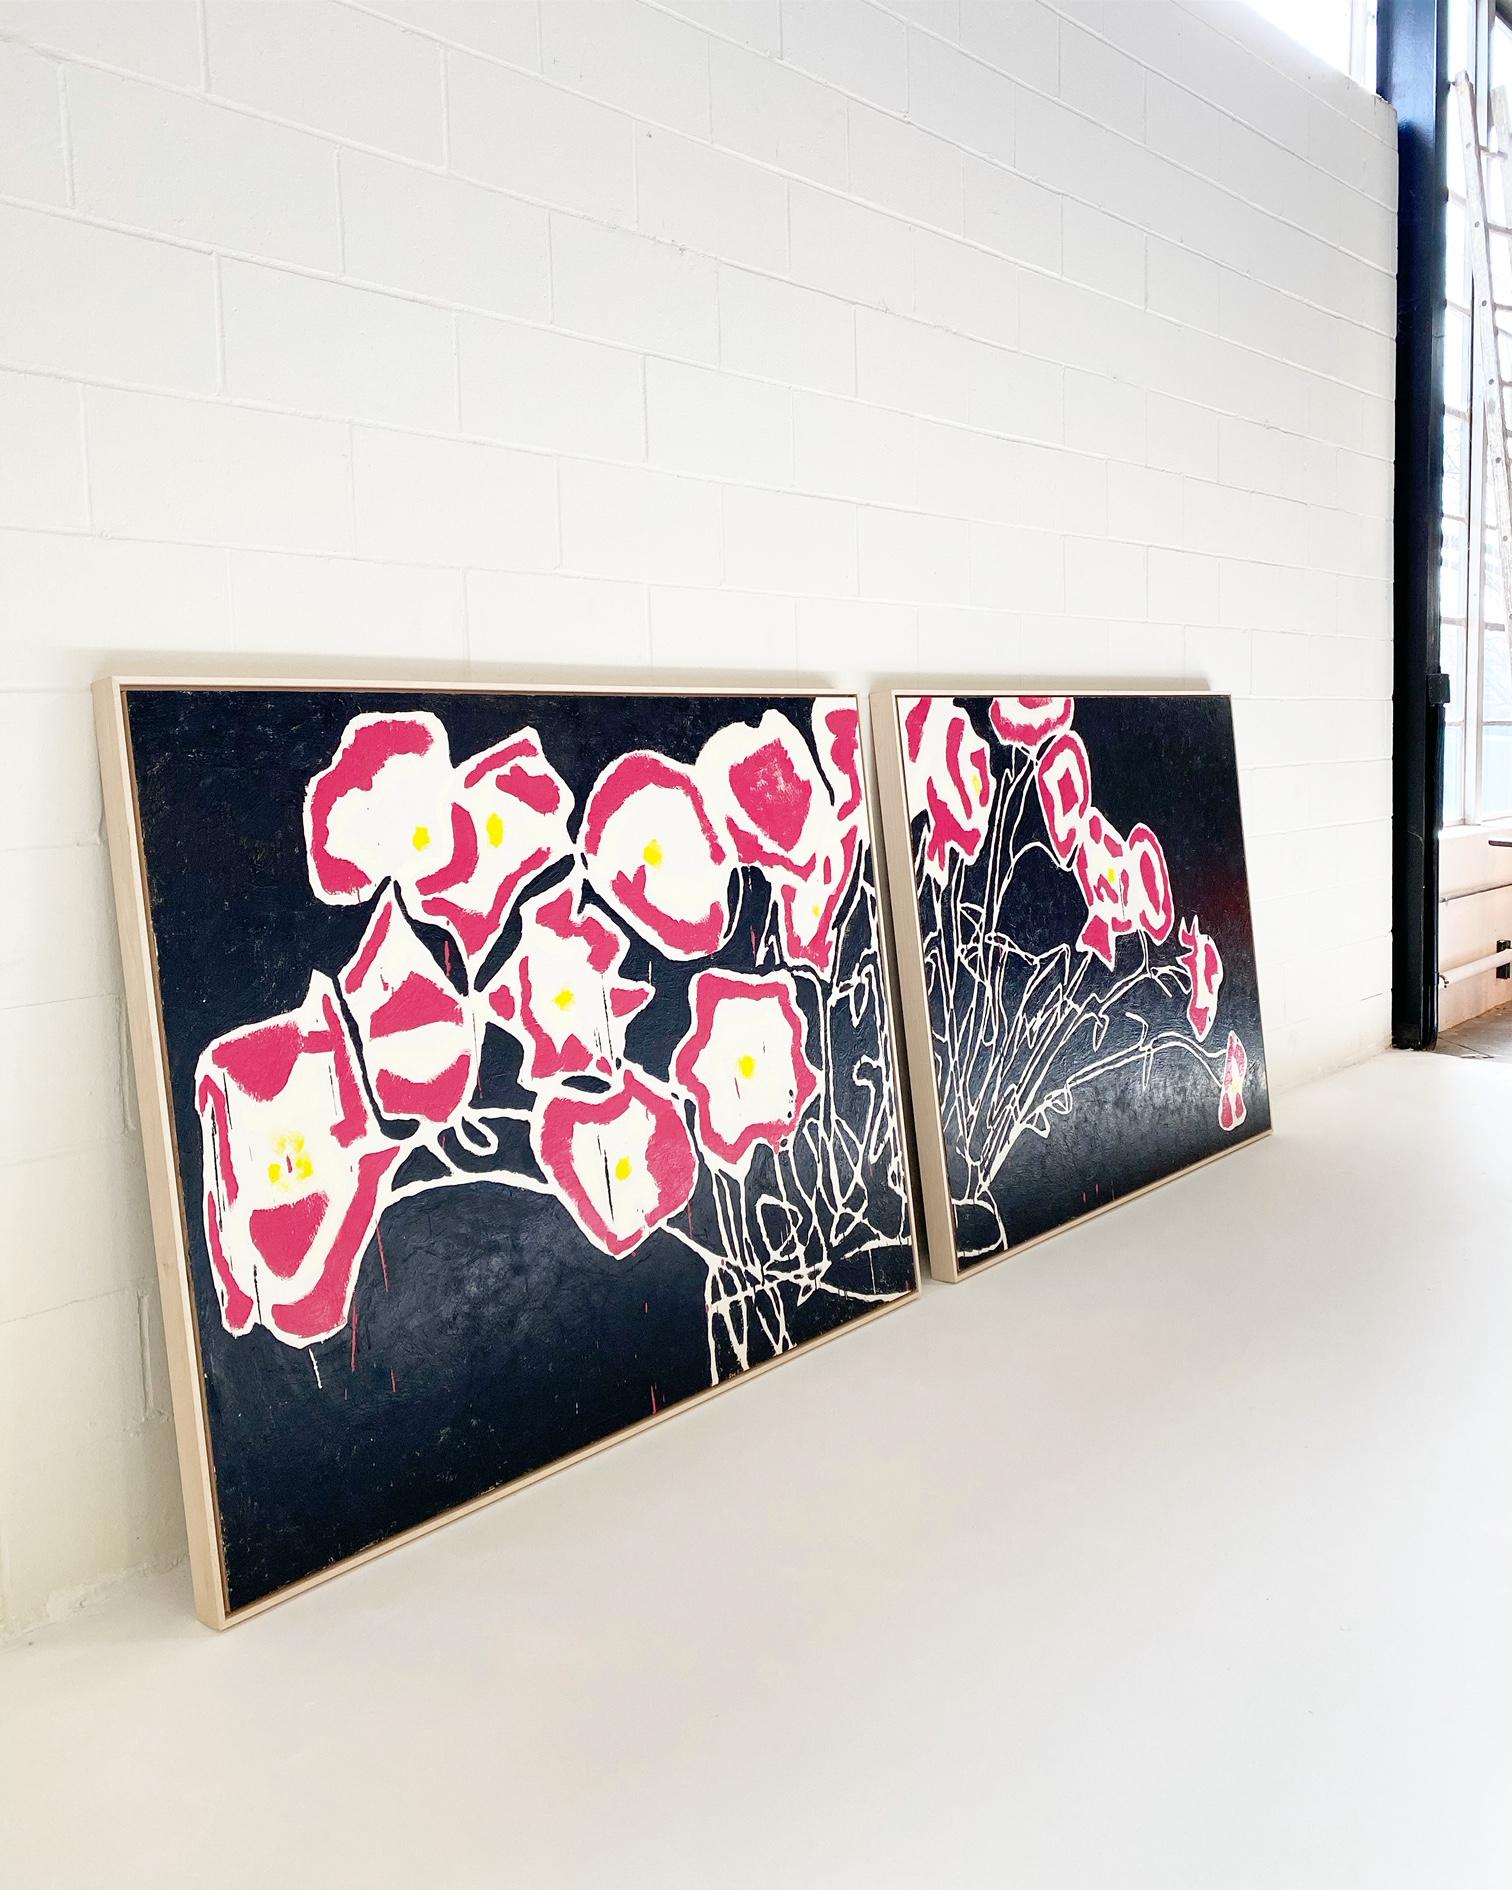 Two-panel work. In Botanical series. Forsyth is proud to represent John O’Hara, a self-taught artist from Saint Louis whose work is found in some of the most beautiful rooms on Earth. His large-scale paintings instantly create a cool environment in